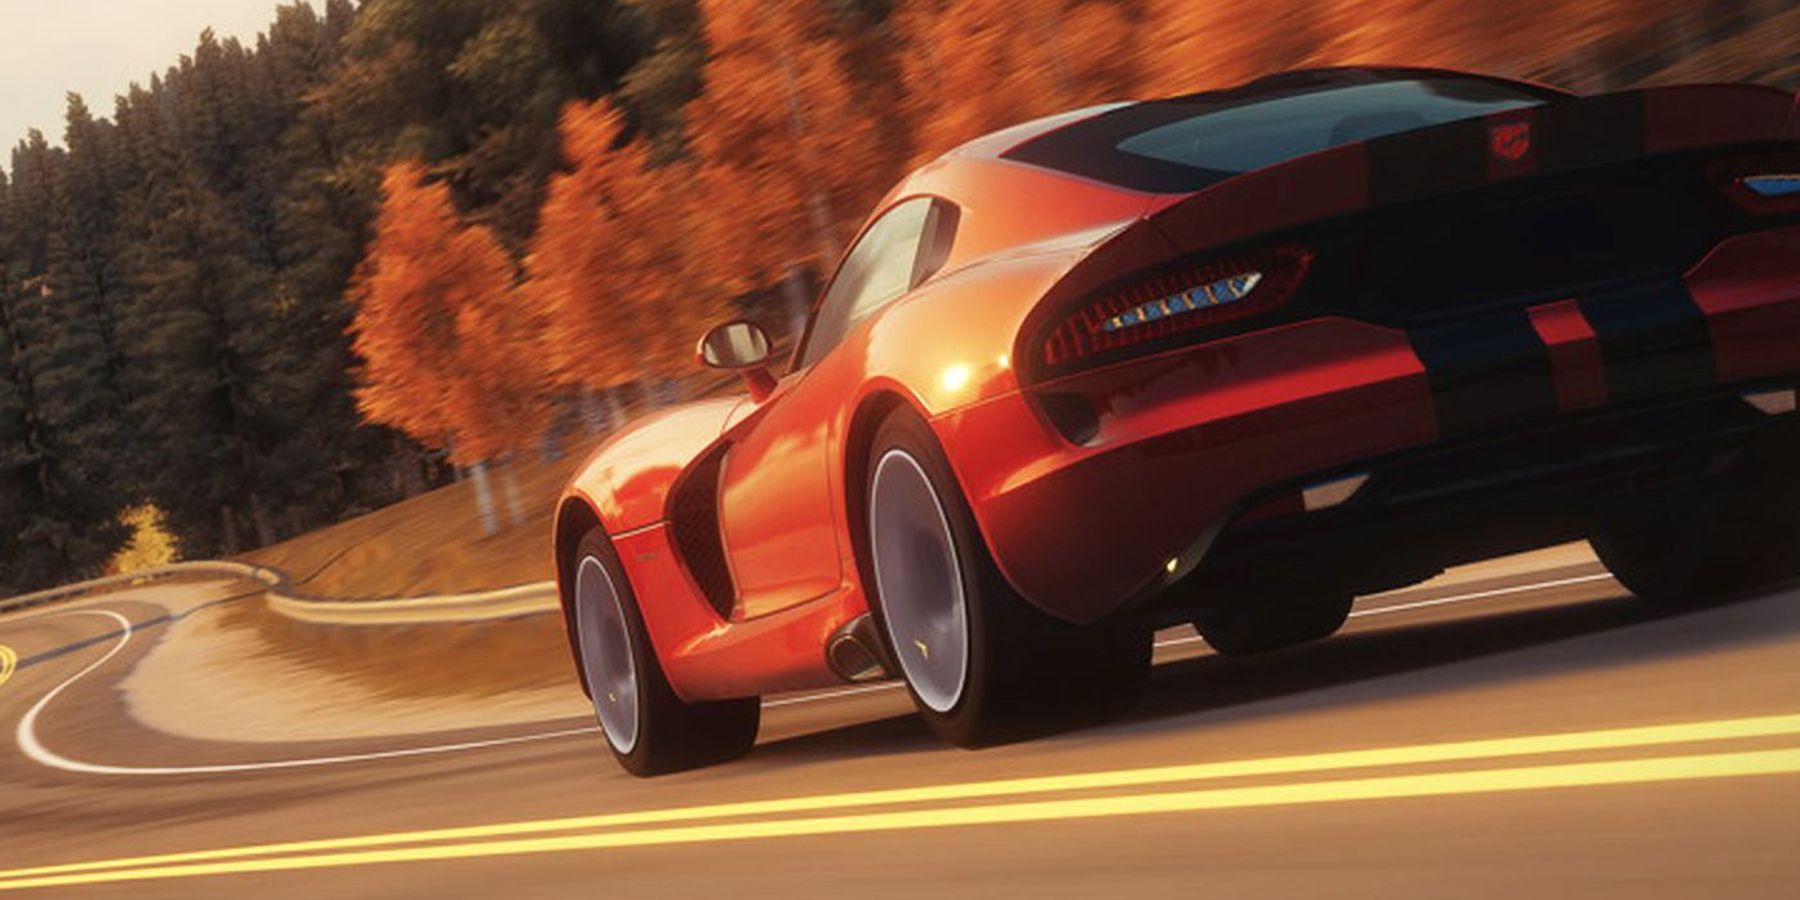 Forza Horizon relisted on the Microsoft Store (Updated)